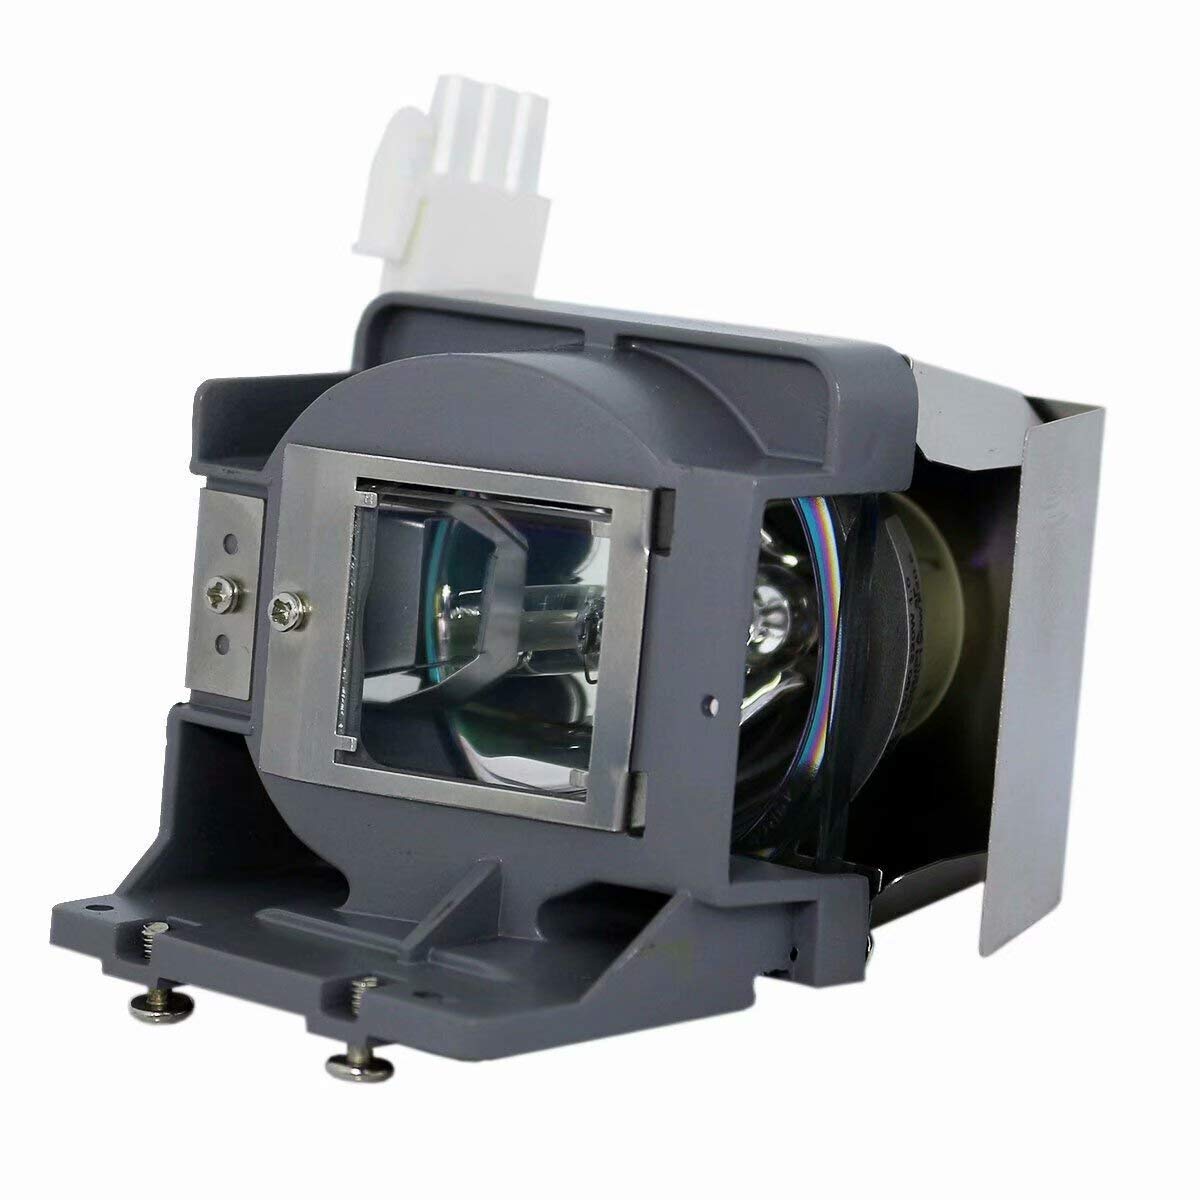 BL-FU190C/PQ484-2401 Projector Lamp met OPTOMA DX328 DX330 DX343 H100 S2010 S2015 S302 S303 S313 W2015 W303 W313 X2010 x2015